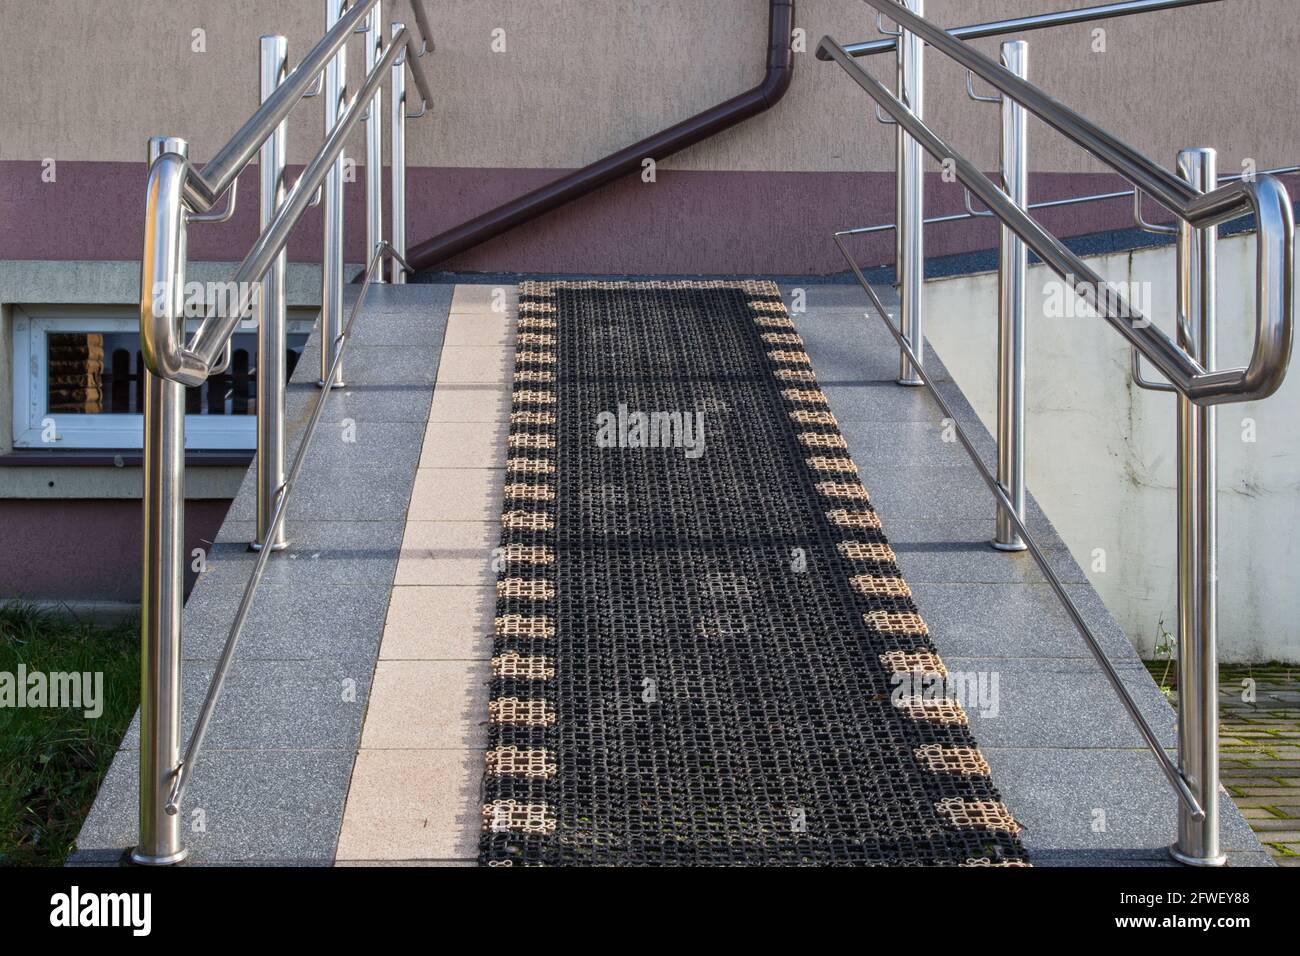 Sloping walkway surrounded by shiny handrails with antislip coating designed for wheelchair lift facility or infants in pram. Concept: social protecti Stock Photo